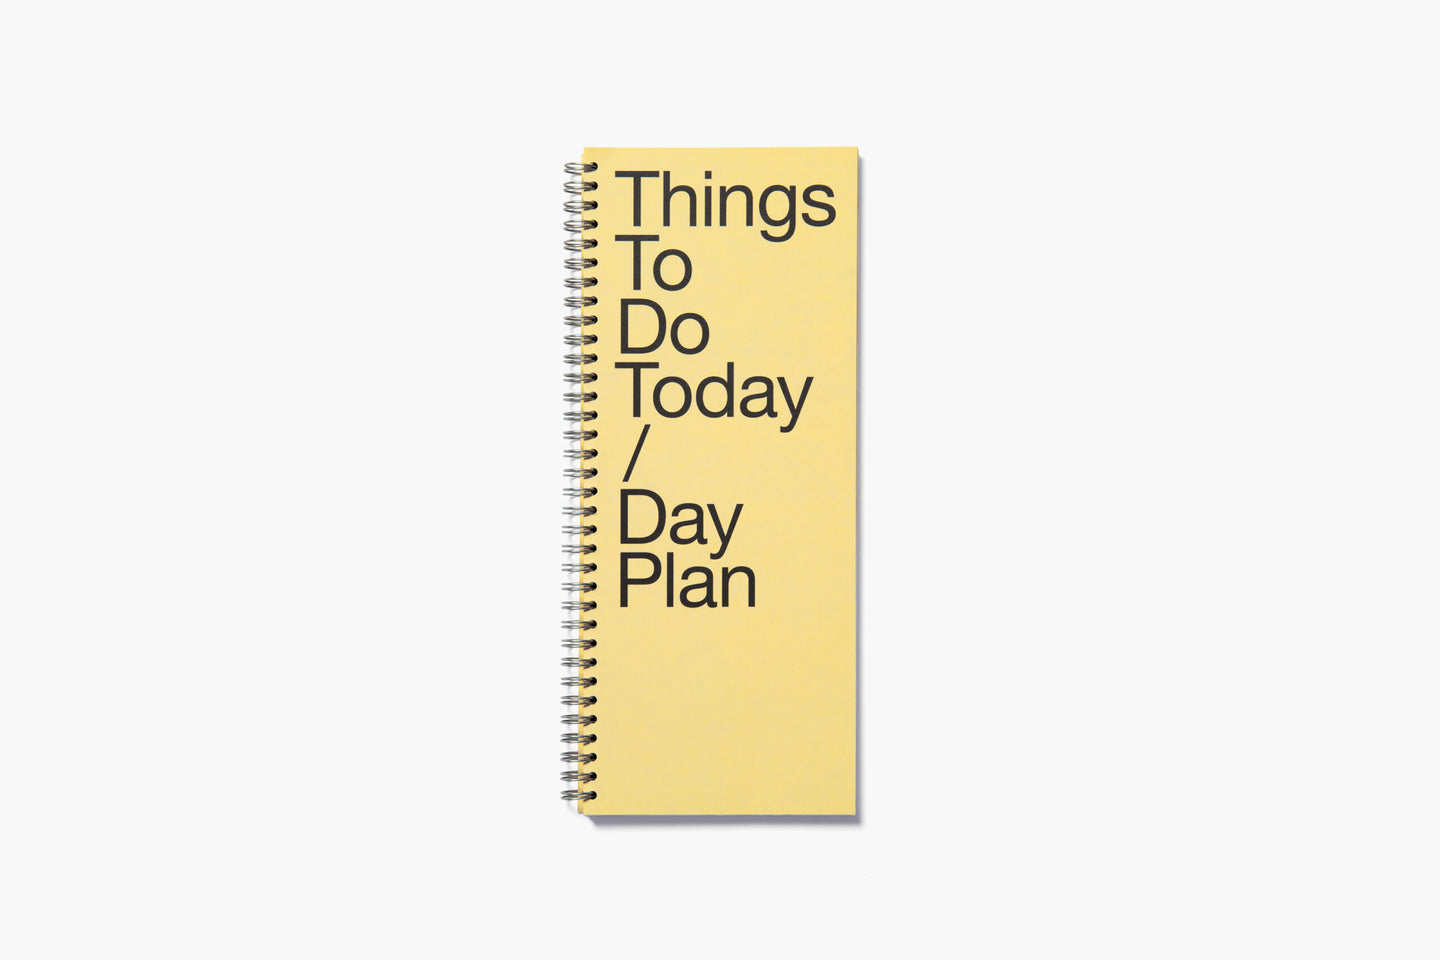 Things To Do Today by Marjolein Delhaas – CUSTARD